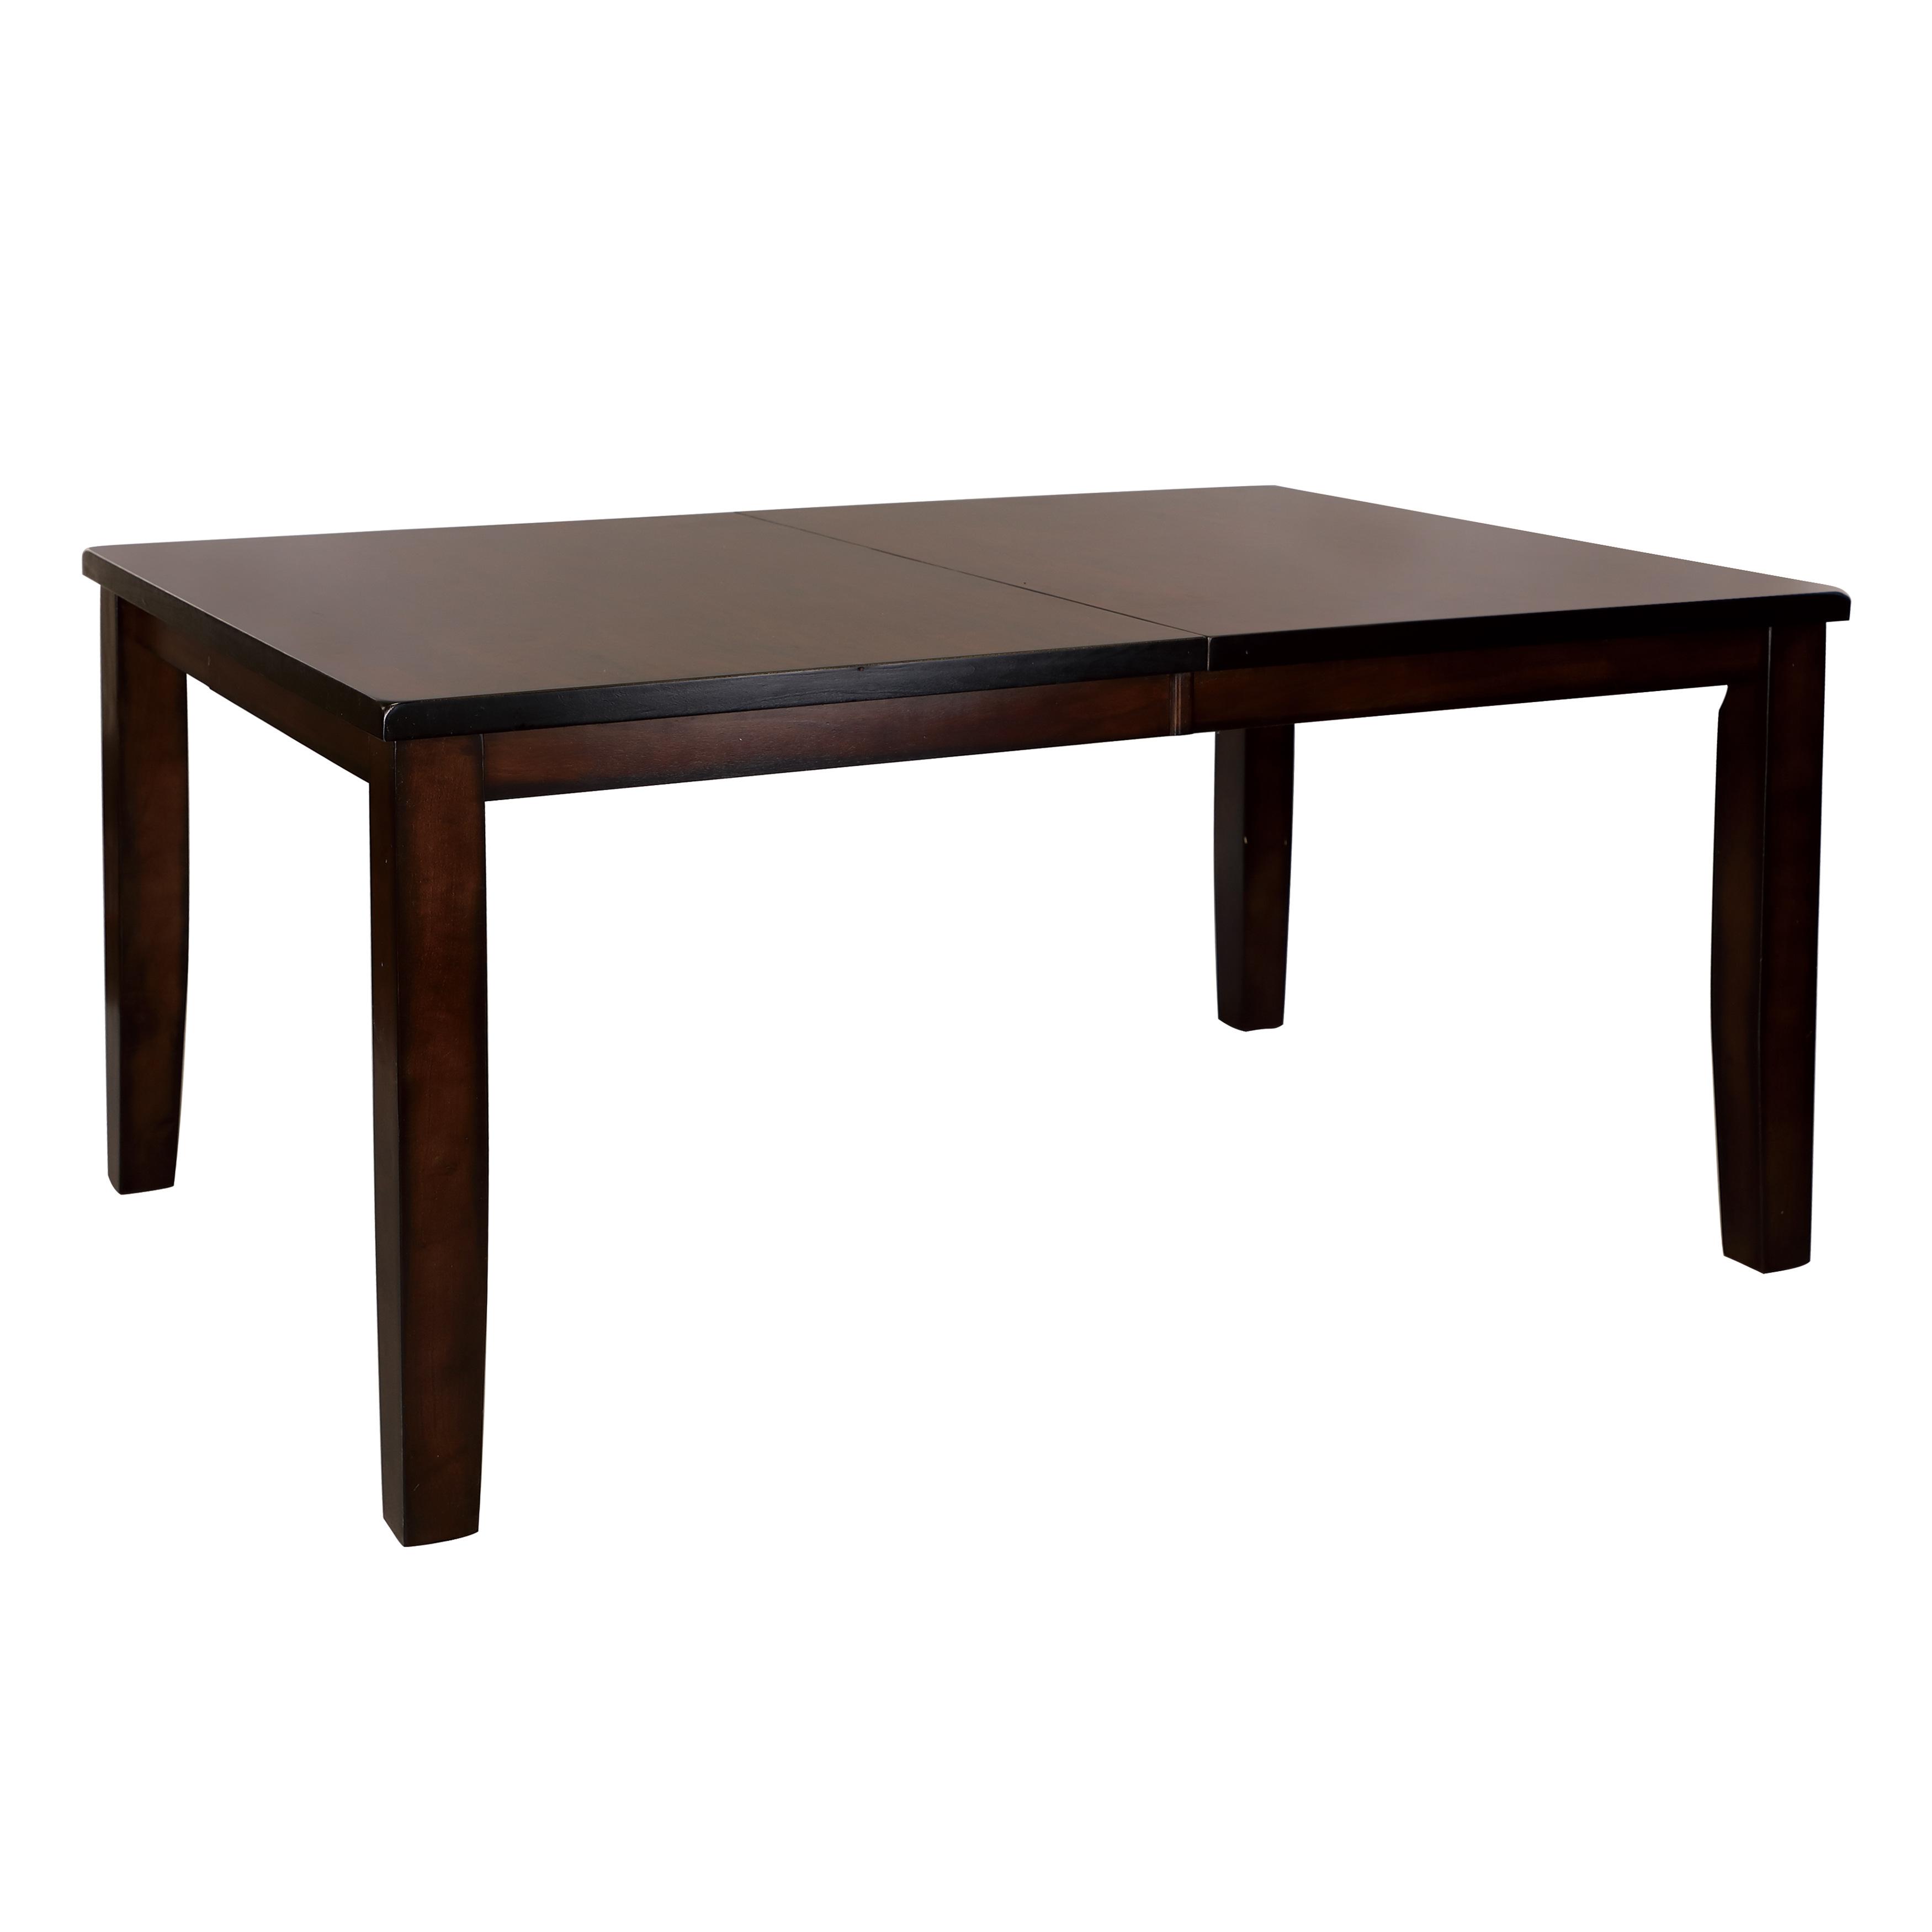 Transitional Dining Table 5547-78 Mantello 5547-78 in Cherry 